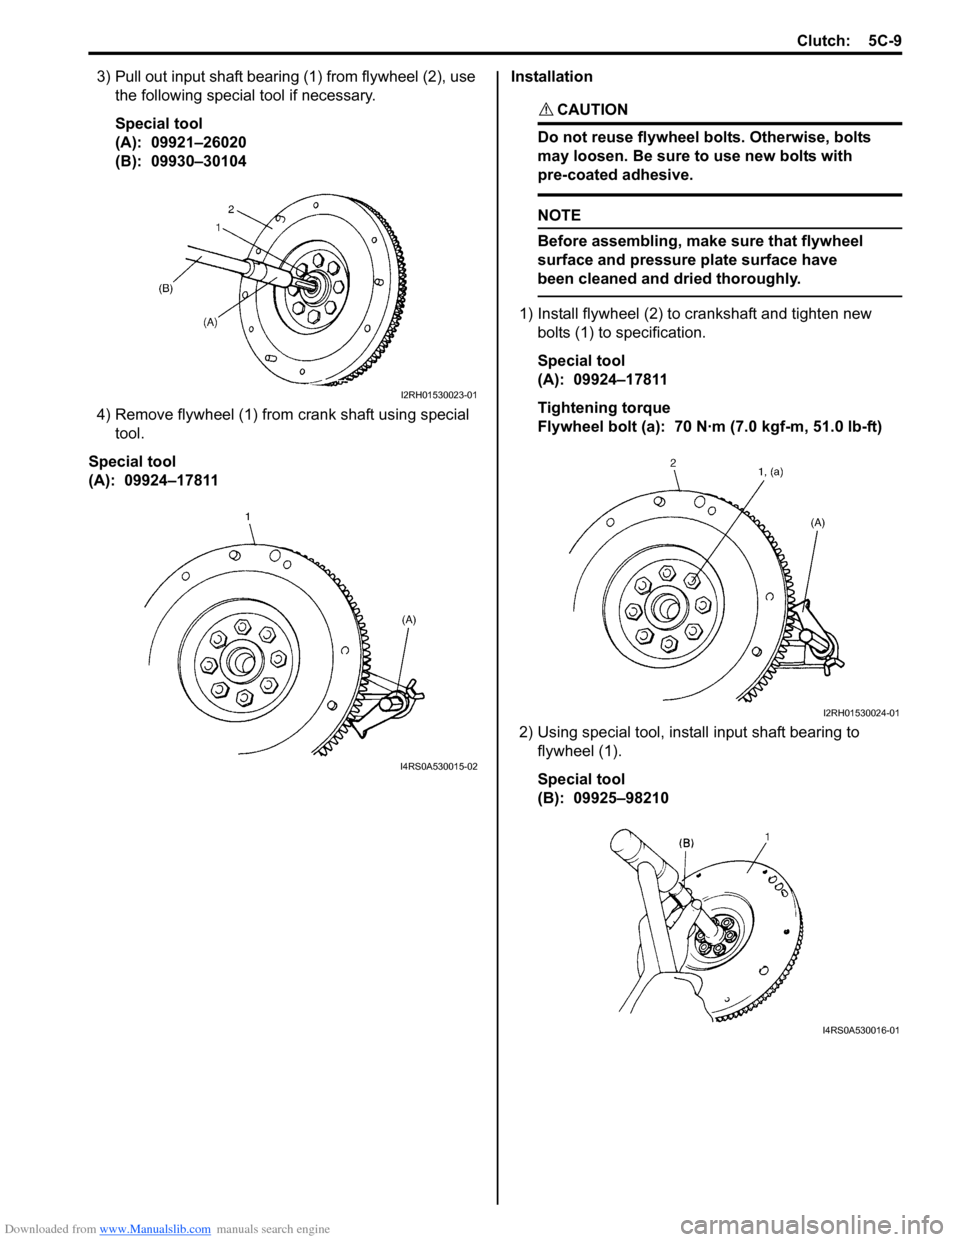 SUZUKI SWIFT 2006 2.G Service Workshop Manual Downloaded from www.Manualslib.com manuals search engine Clutch: 5C-9
3) Pull out input shaft bearing (1) from flywheel (2), use the following special tool if necessary.
Special tool
(A):  09921–260